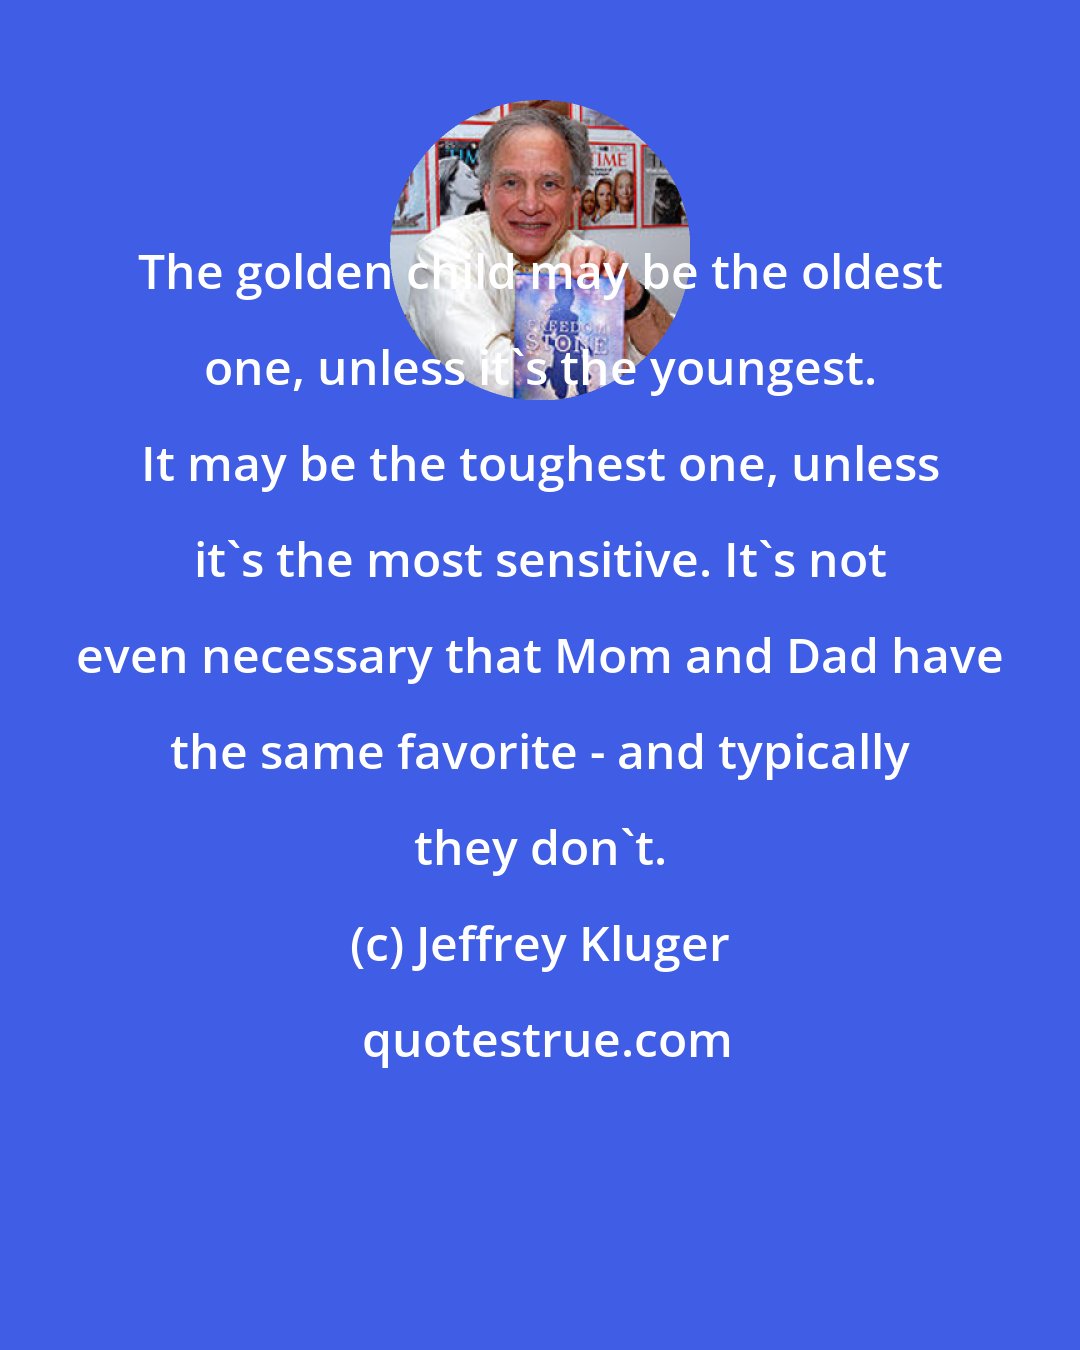 Jeffrey Kluger: The golden child may be the oldest one, unless it's the youngest. It may be the toughest one, unless it's the most sensitive. It's not even necessary that Mom and Dad have the same favorite - and typically they don't.